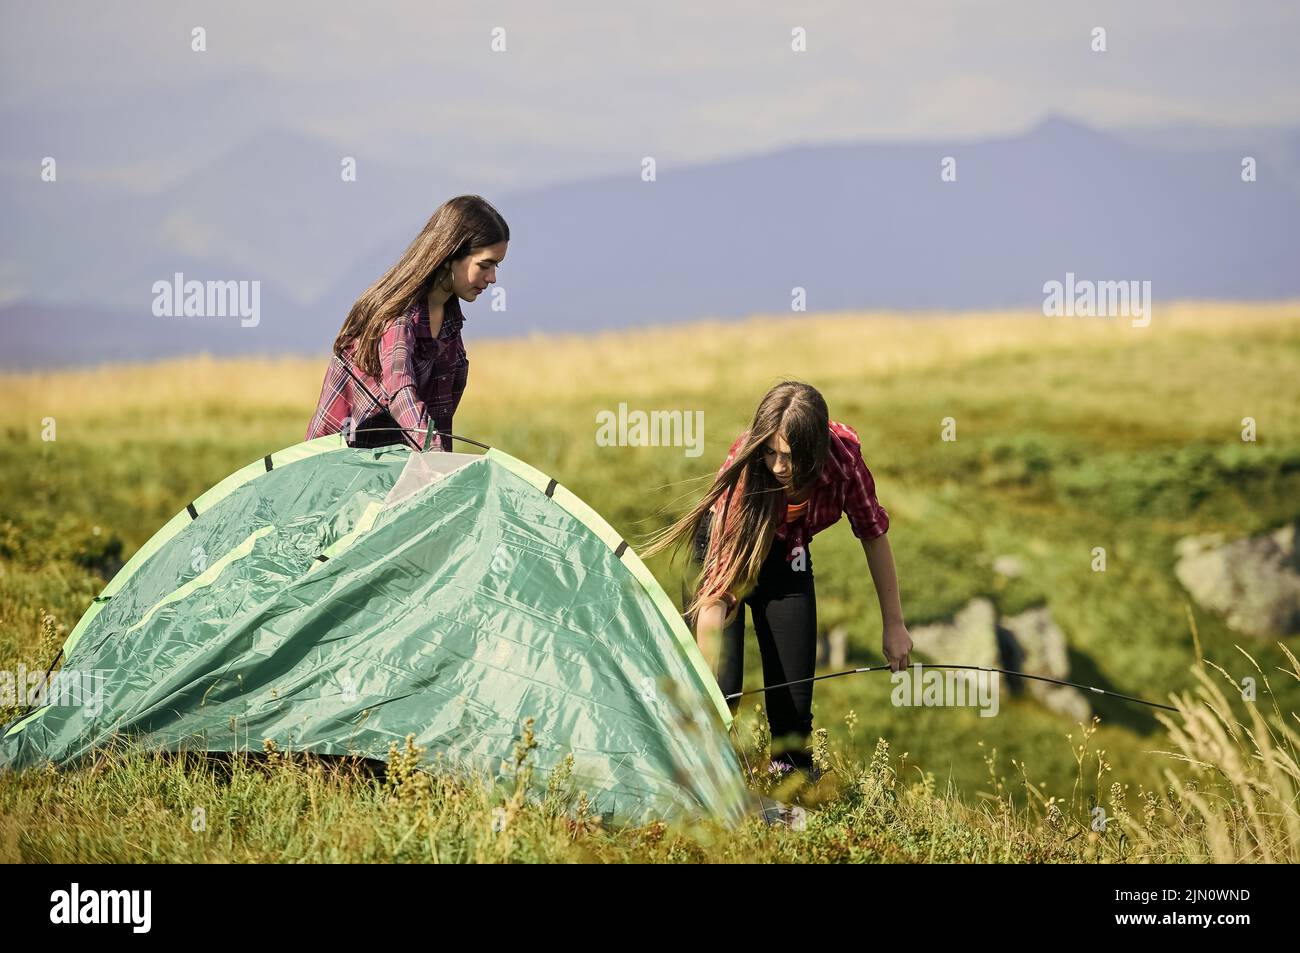 Hiking activity. Attach necessary structural components tent. Helpful to have partner for raising tent. Prepare for night. Girl scout concept. Women Stock Photo